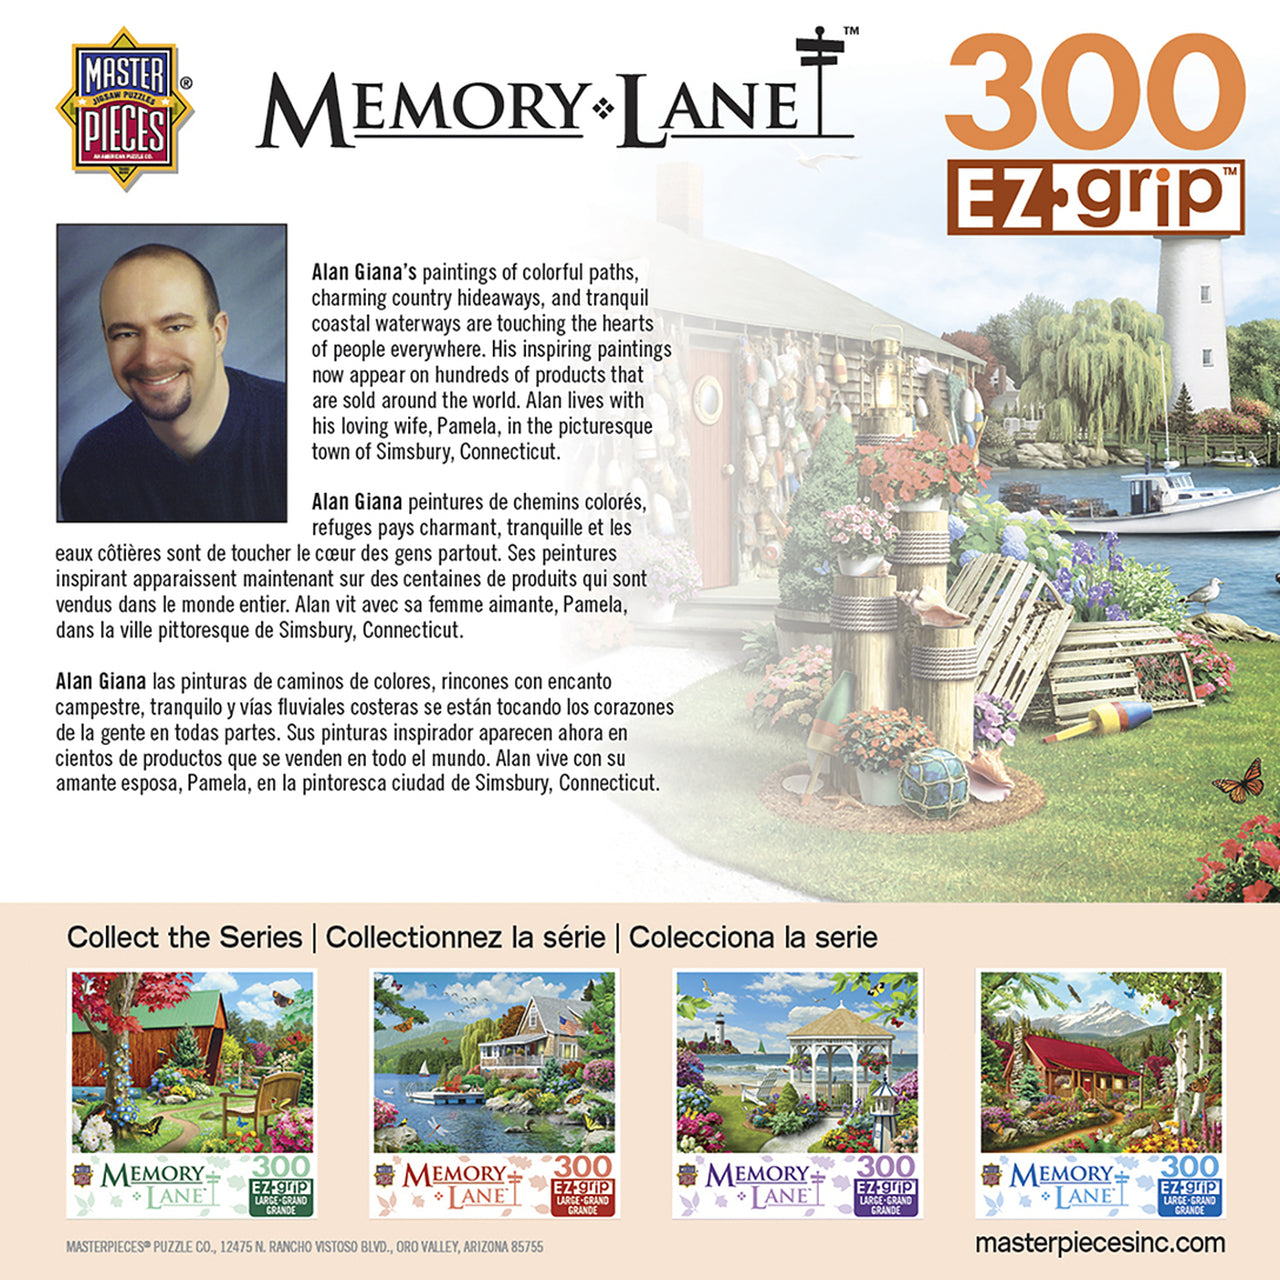 Memory Lane Lobster Bay - Large 300 Piece EZGrip Jigsaw Puzzle by Masterpieces